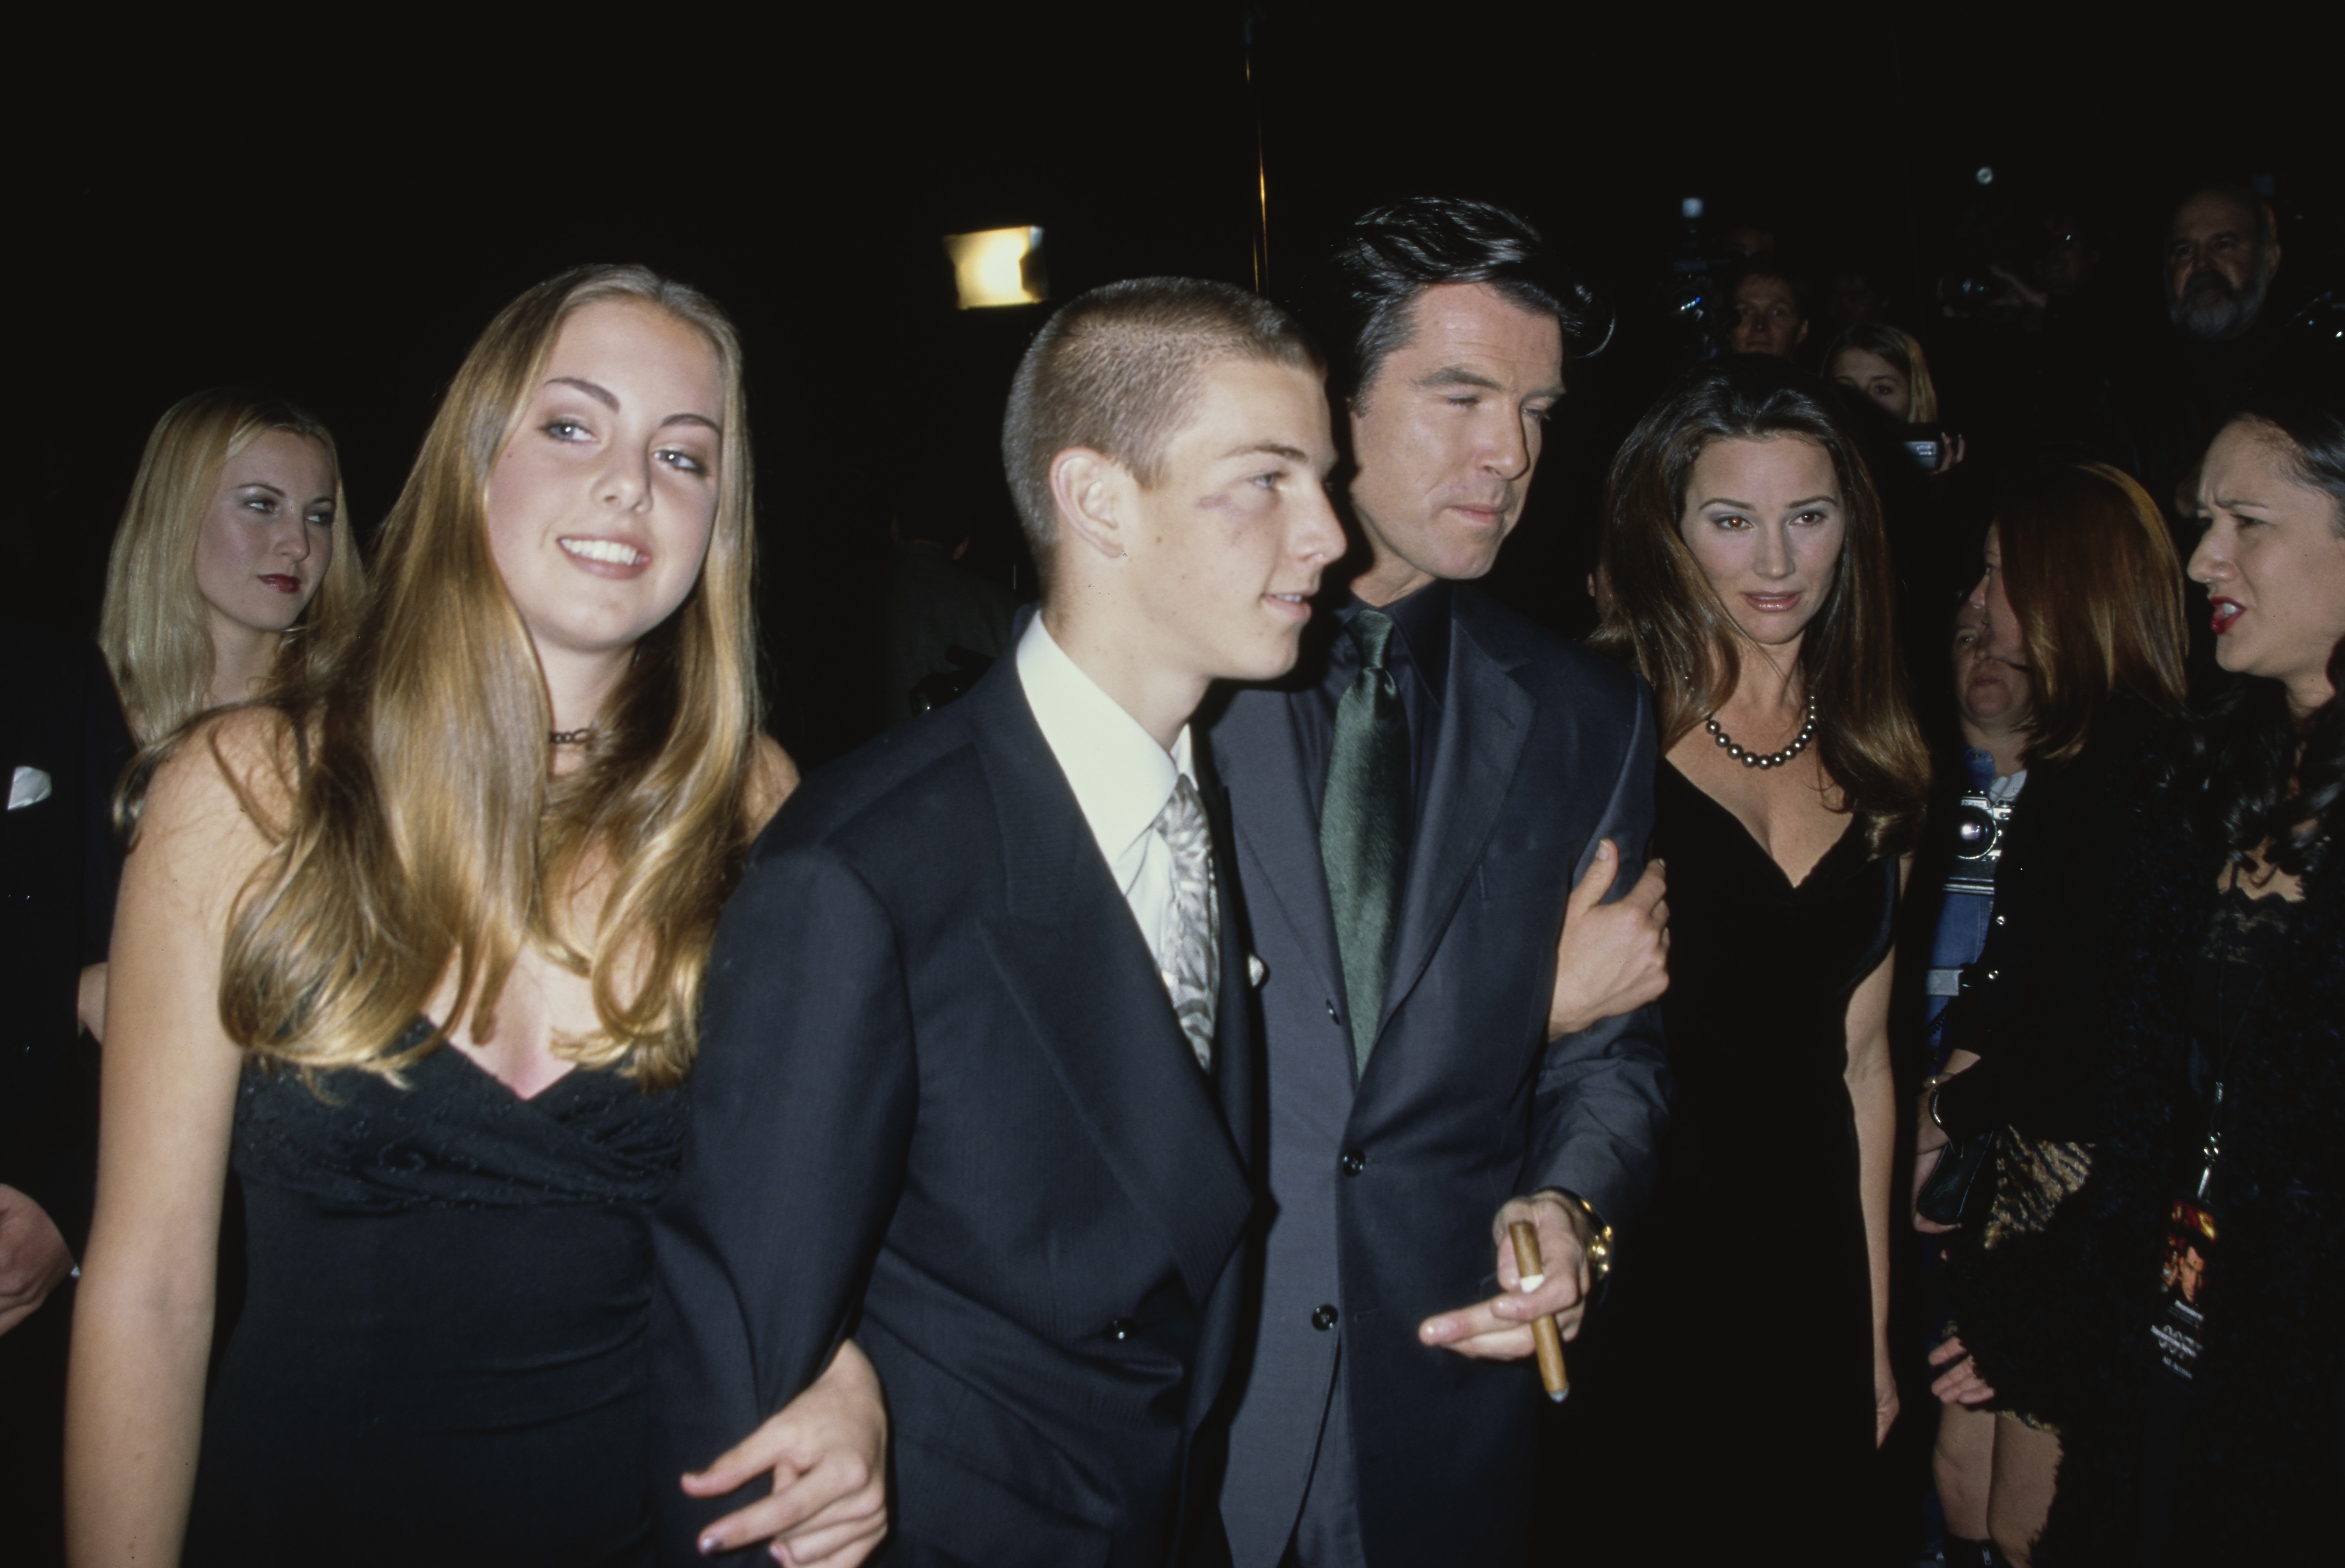 Charlotte Brosnan, Sean Brosnan, Pierce Brosnan, and Keely Shaye Smith at the premiere of "Tomorrow Never Dies" in Los Angeles on December 16, 1997 | Source: Getty Images